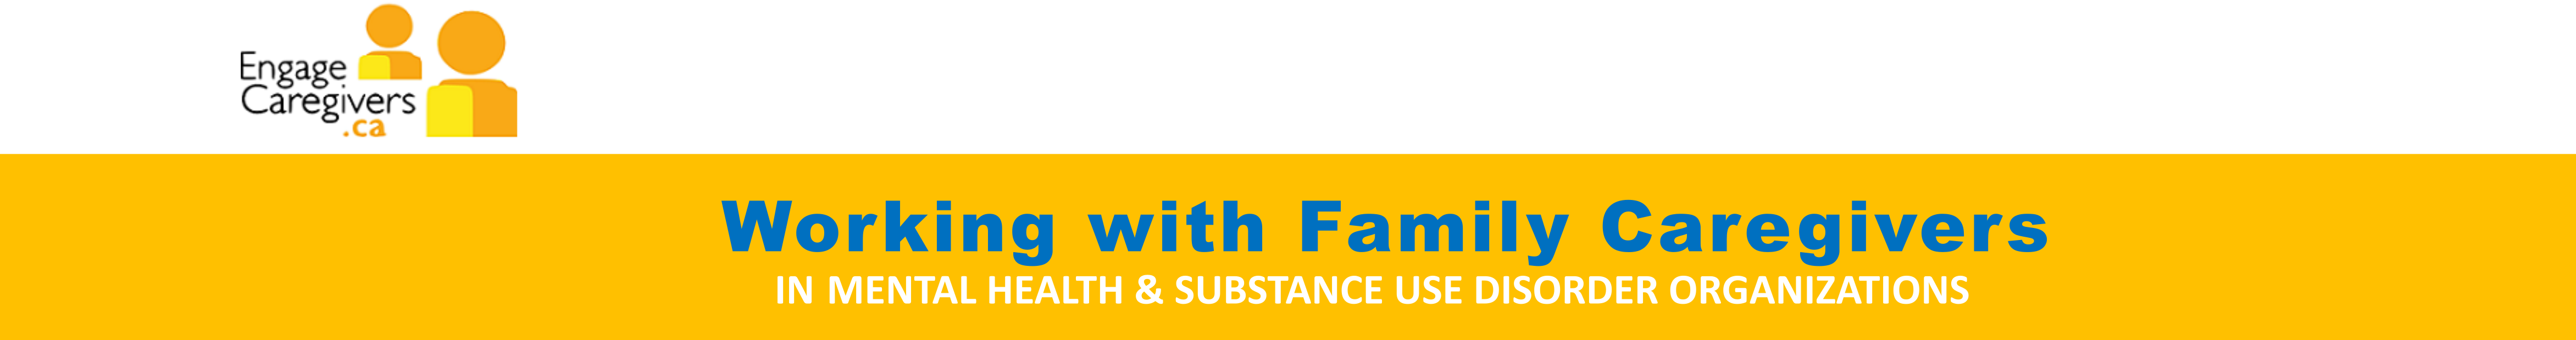 Header: Working with family caregivers in the mental health and substance use disorder organizations